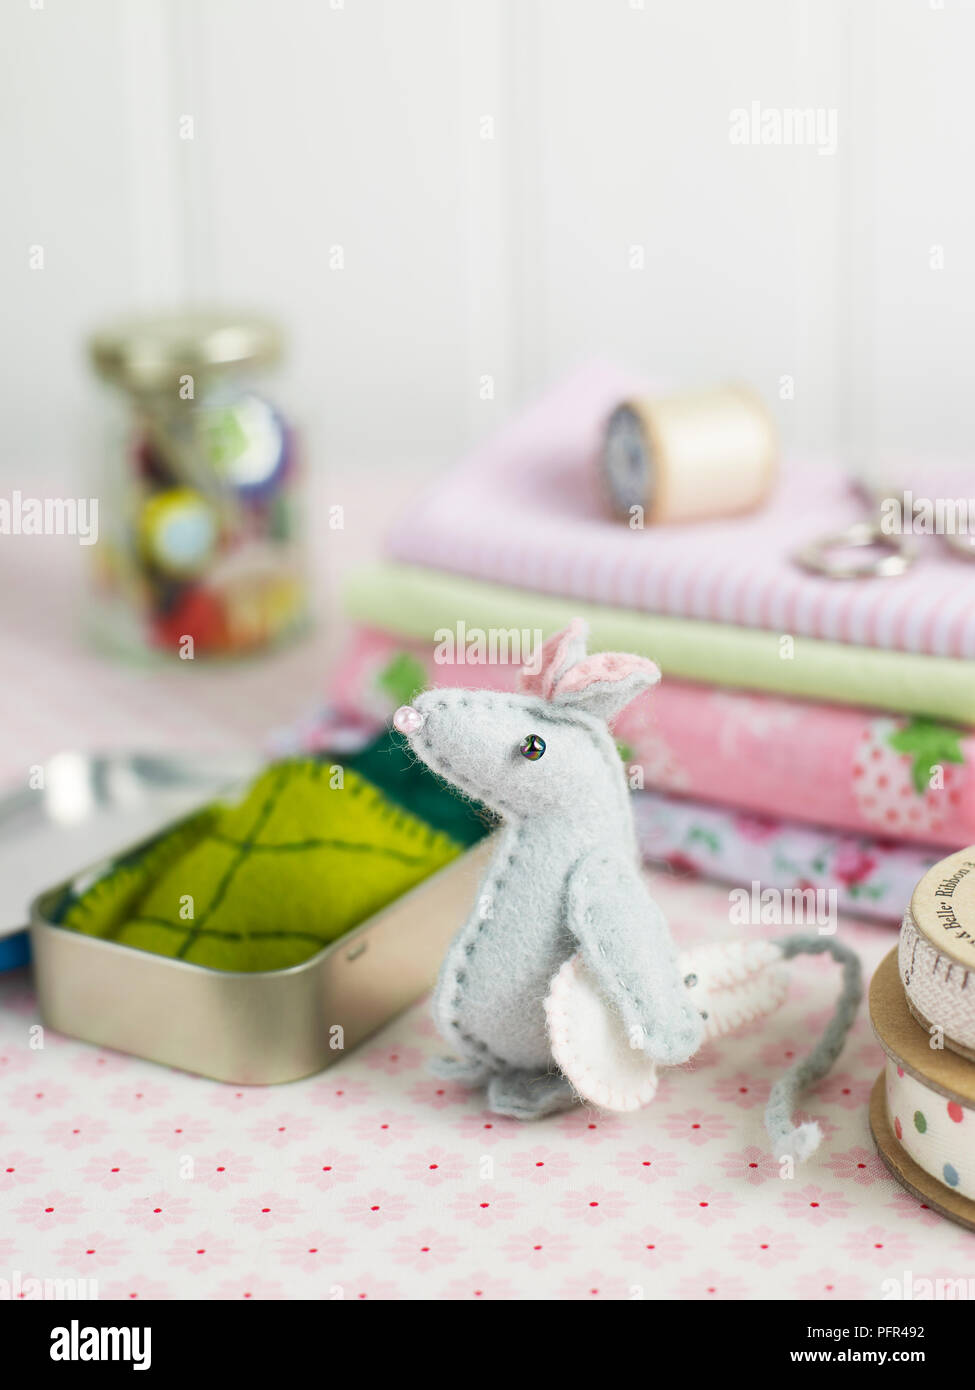 Felt mouse and tin surrounded by craft materials Stock Photo